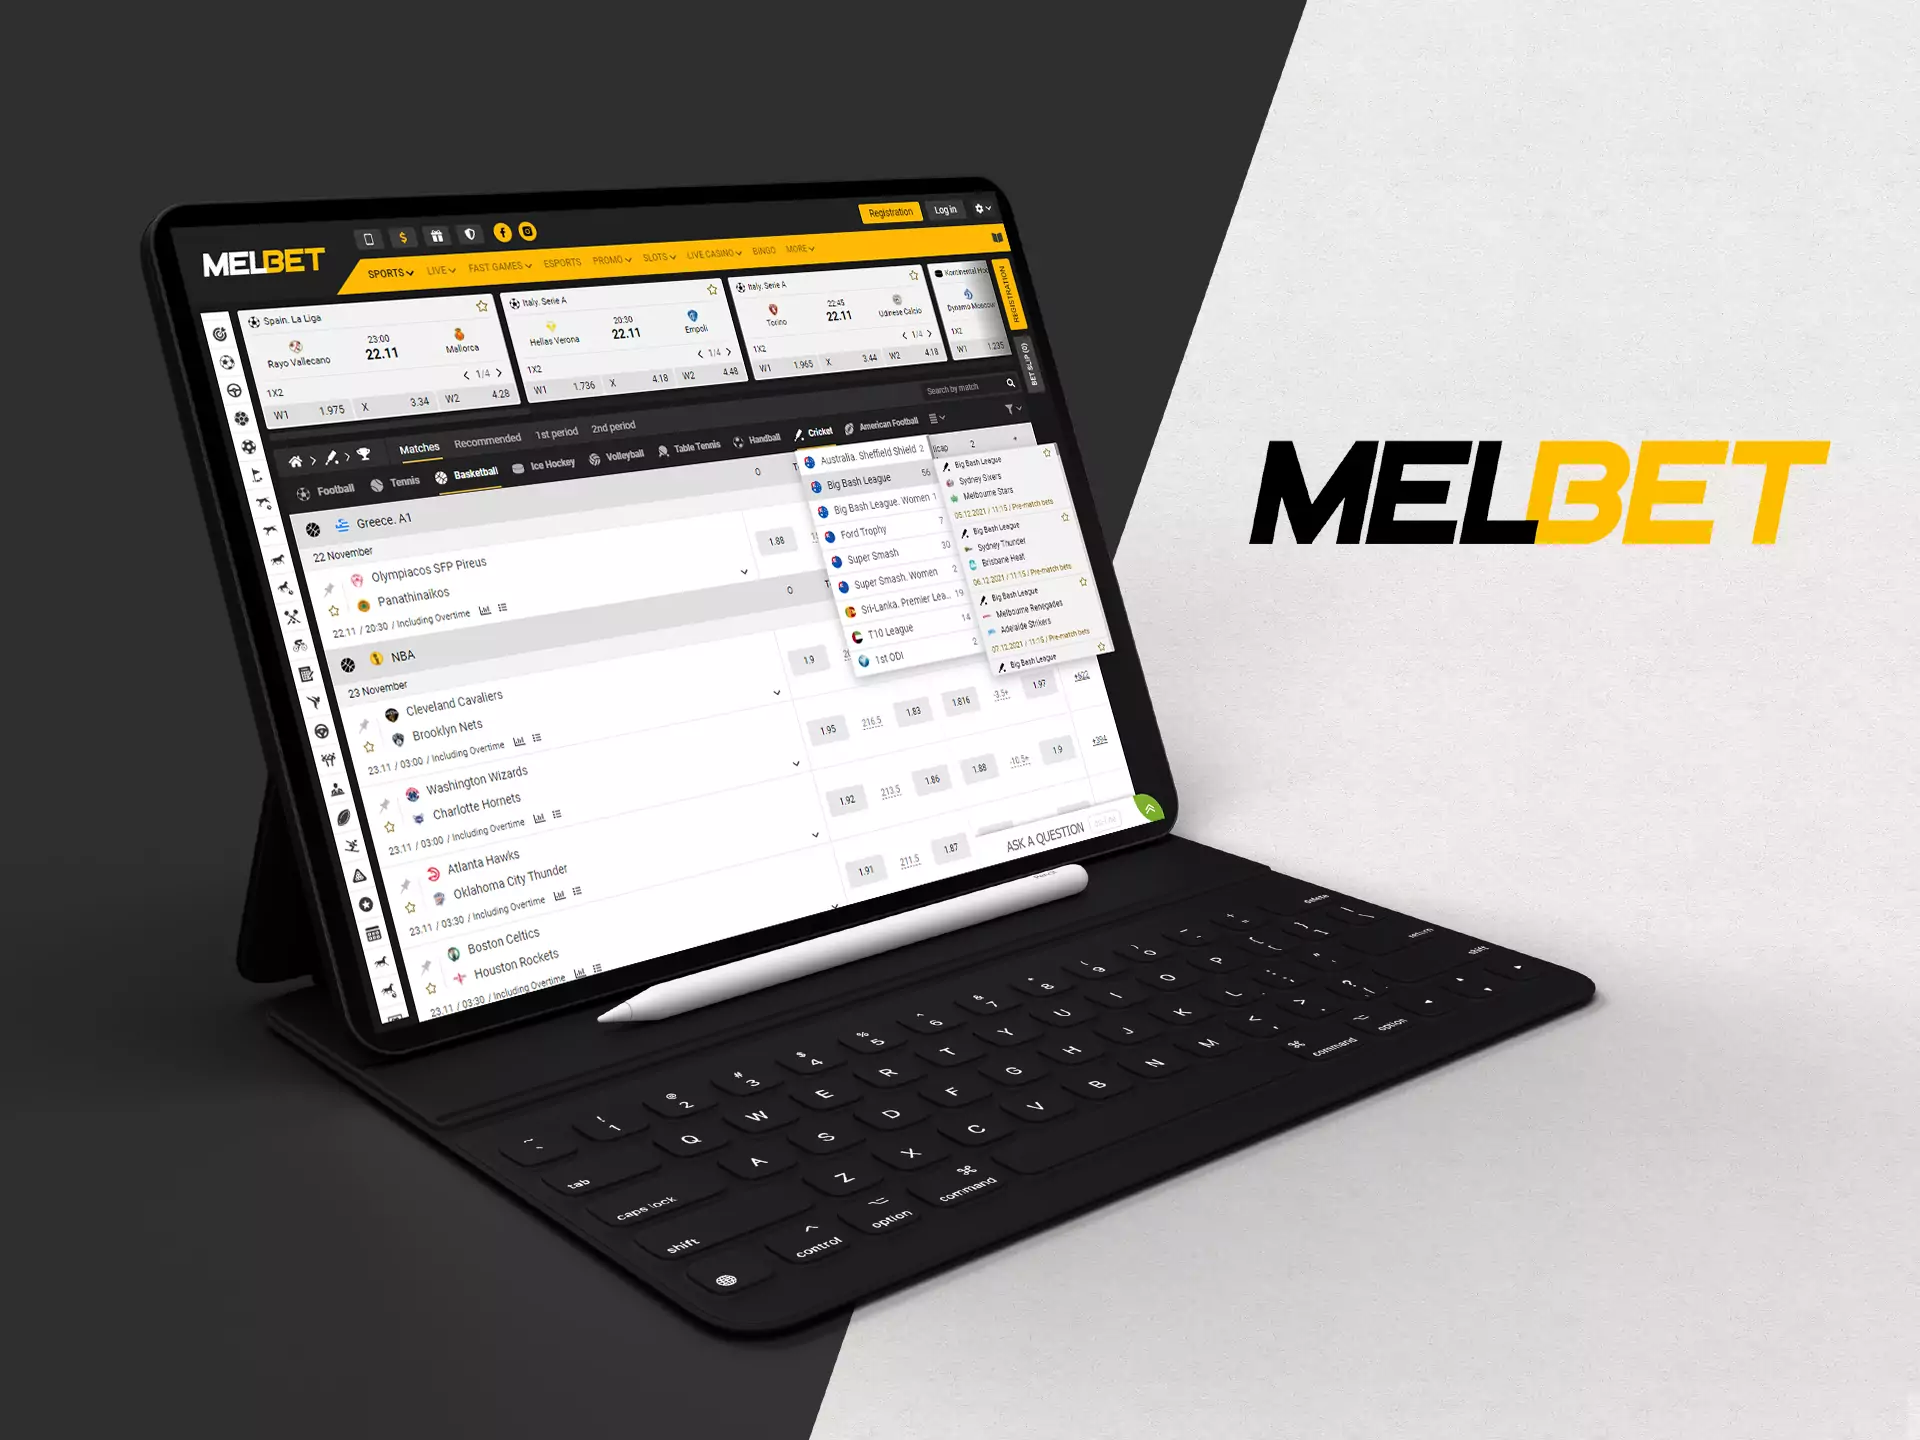 At Melbet, you can bet on cricket and other sports events on the site or in the apps.